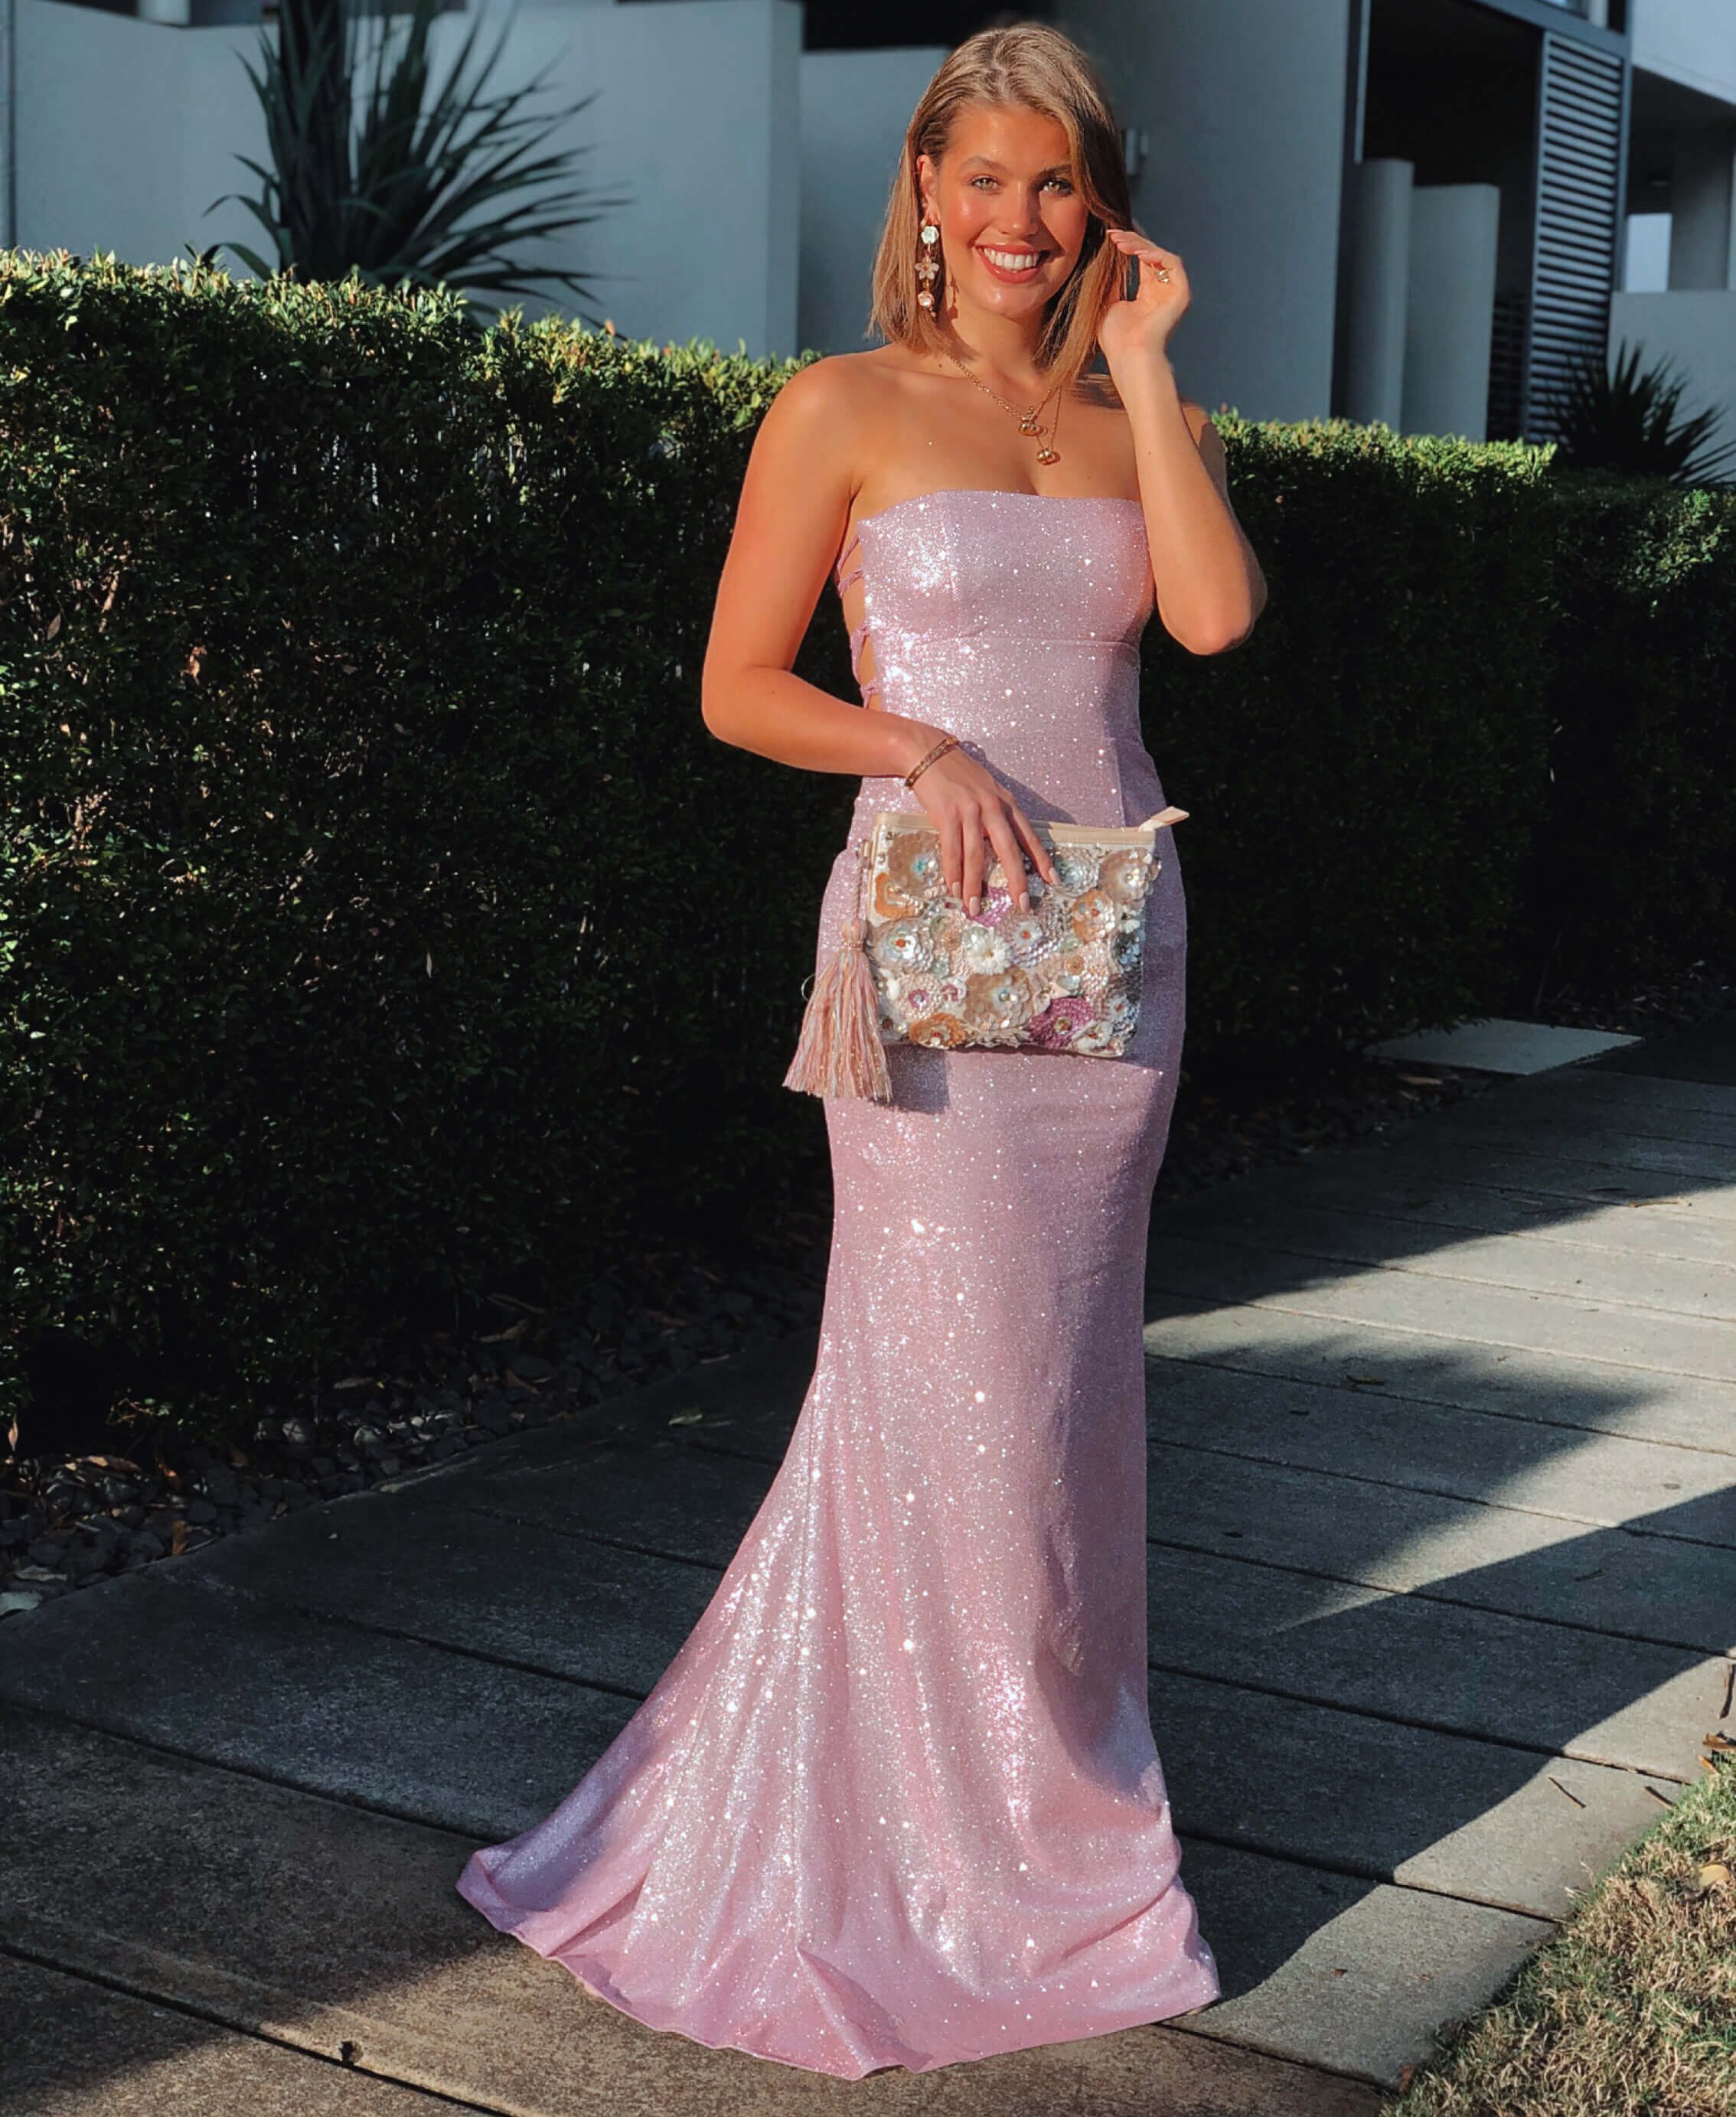 Iridescent Sequin Bodycon Dress in Pink | LUCY IN THE SKY